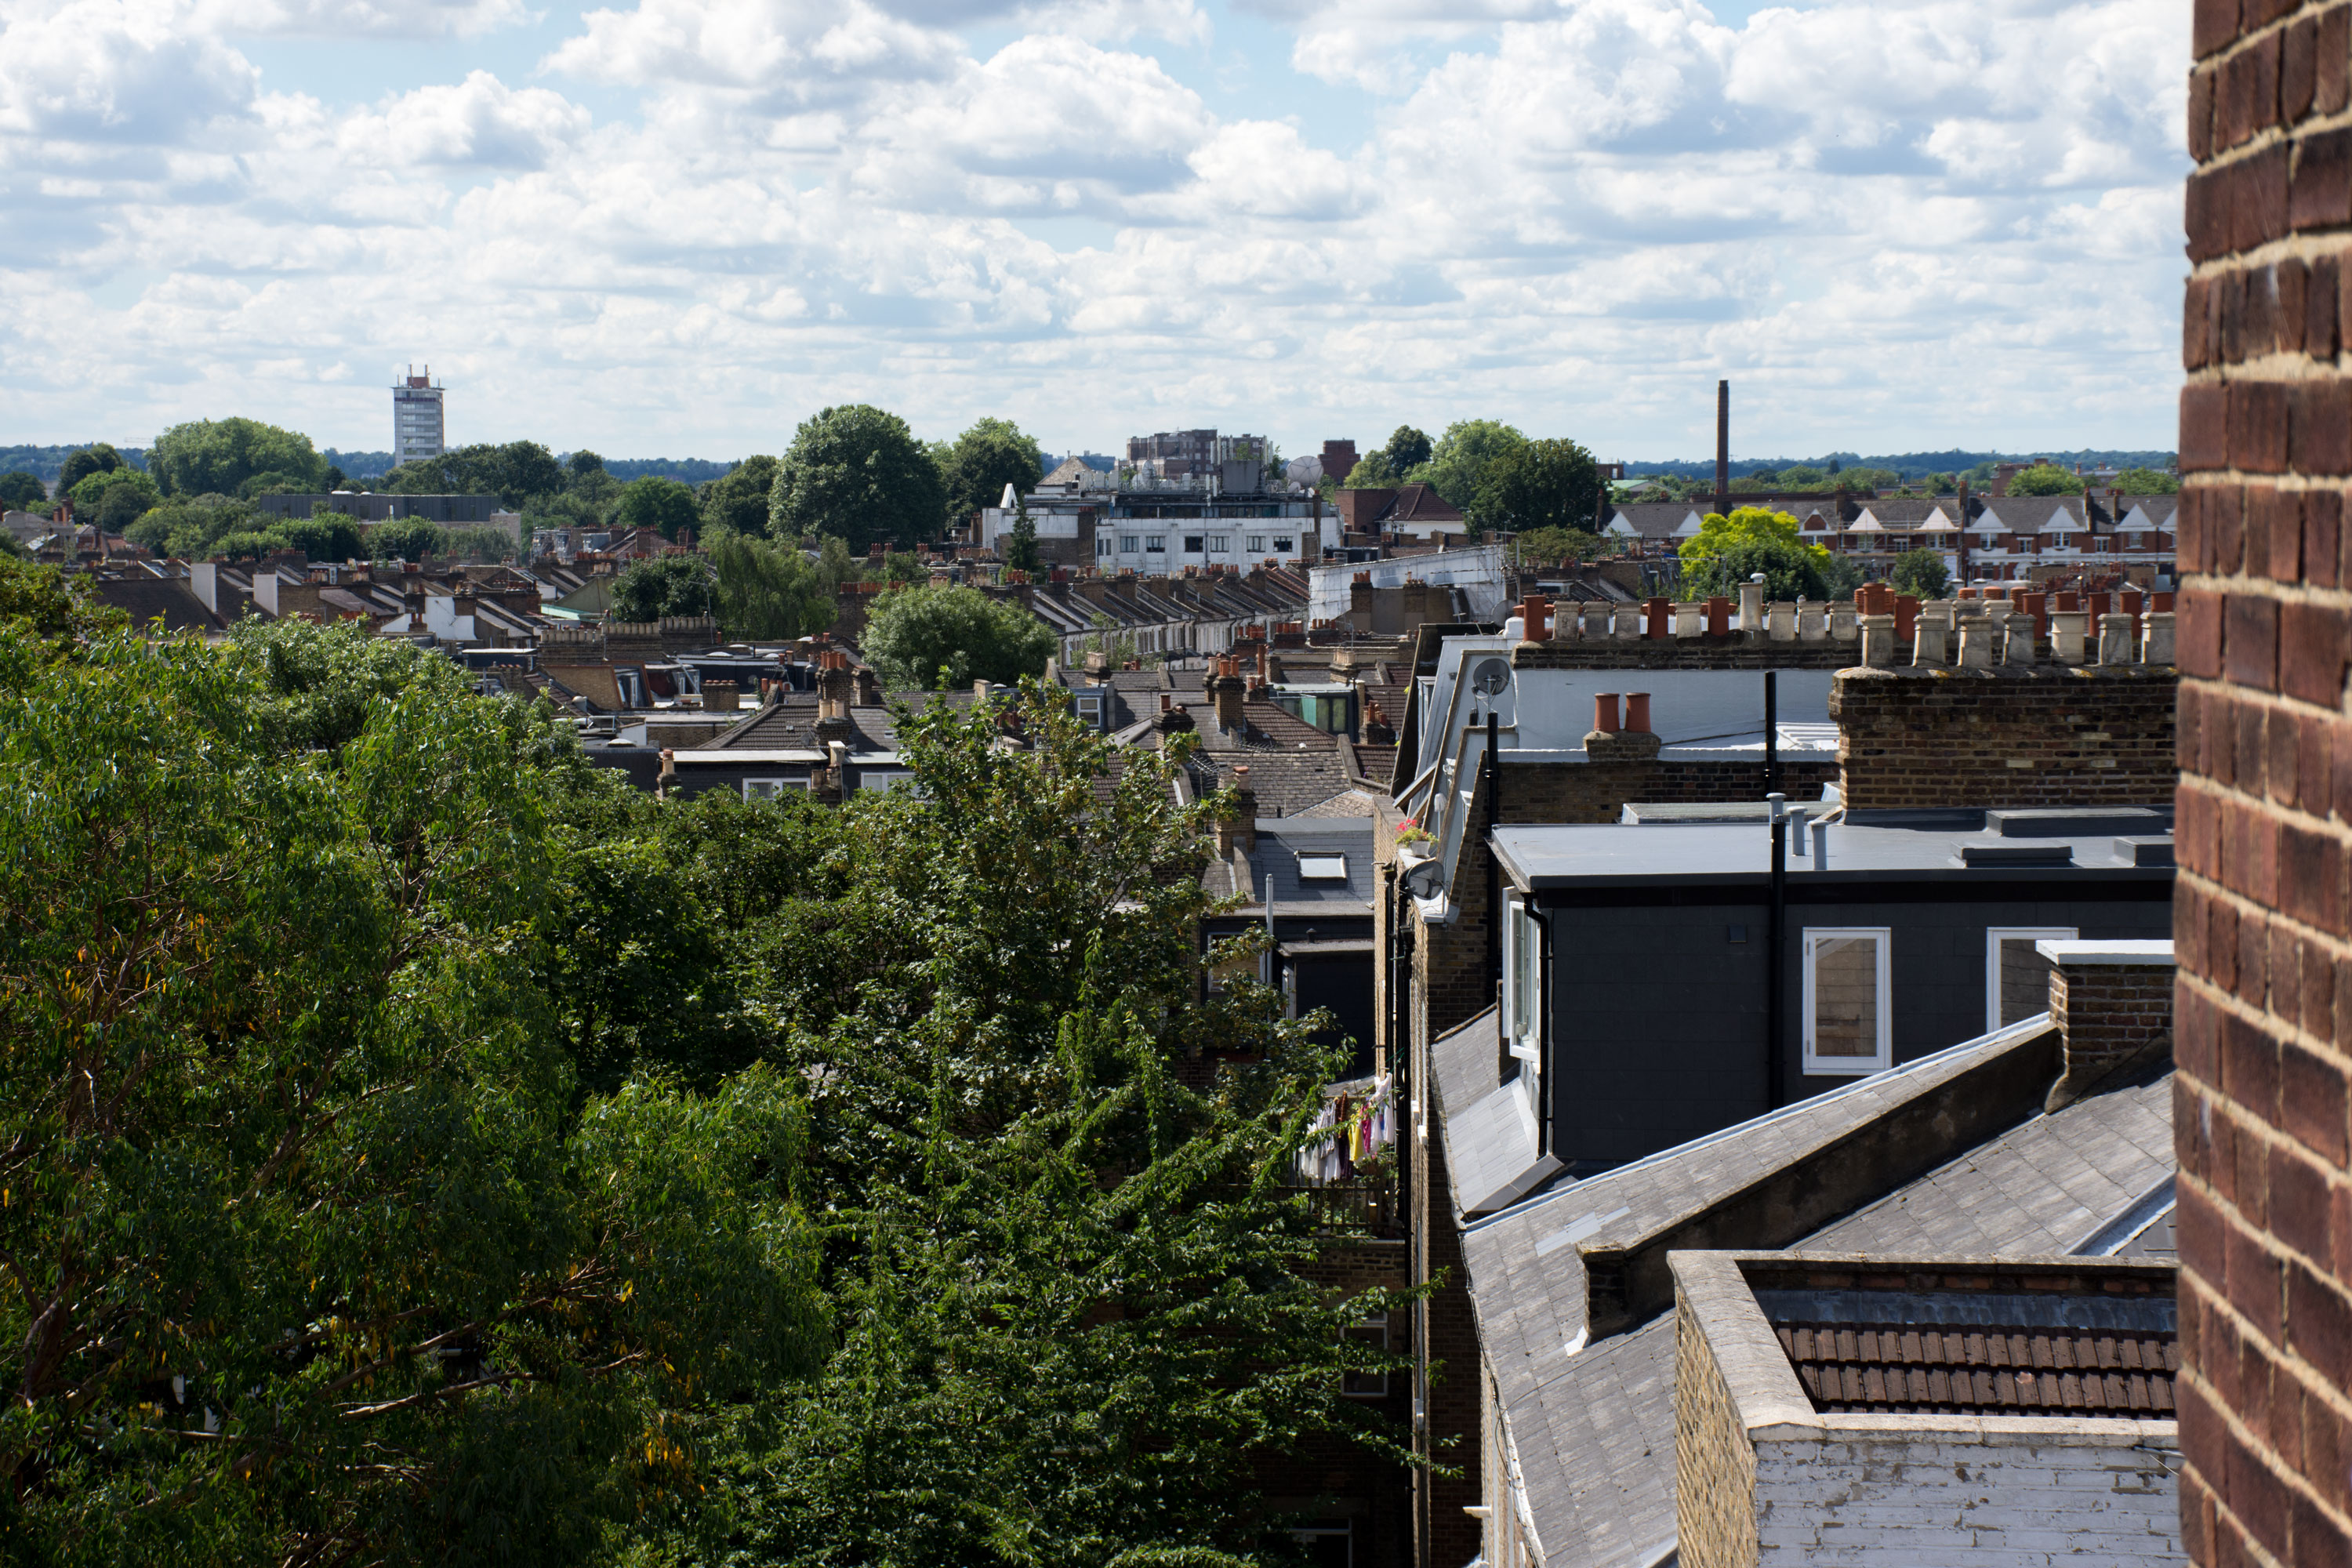 Views to the west of Shepherds Bush 